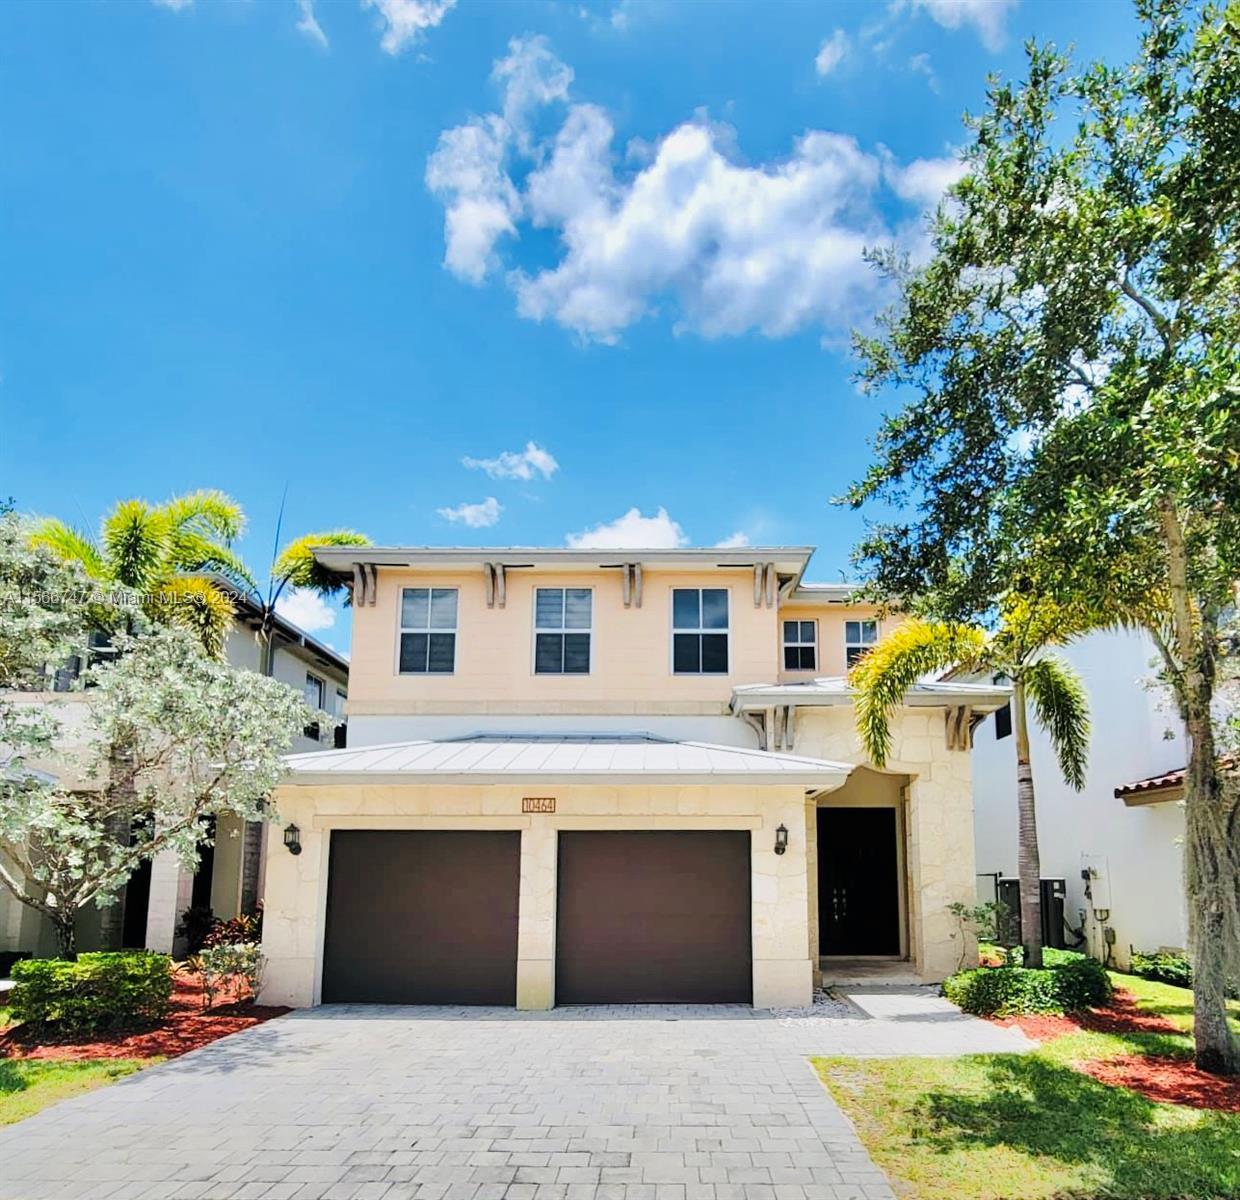 Photo of 10464 NW 70 Ln in Doral, FL